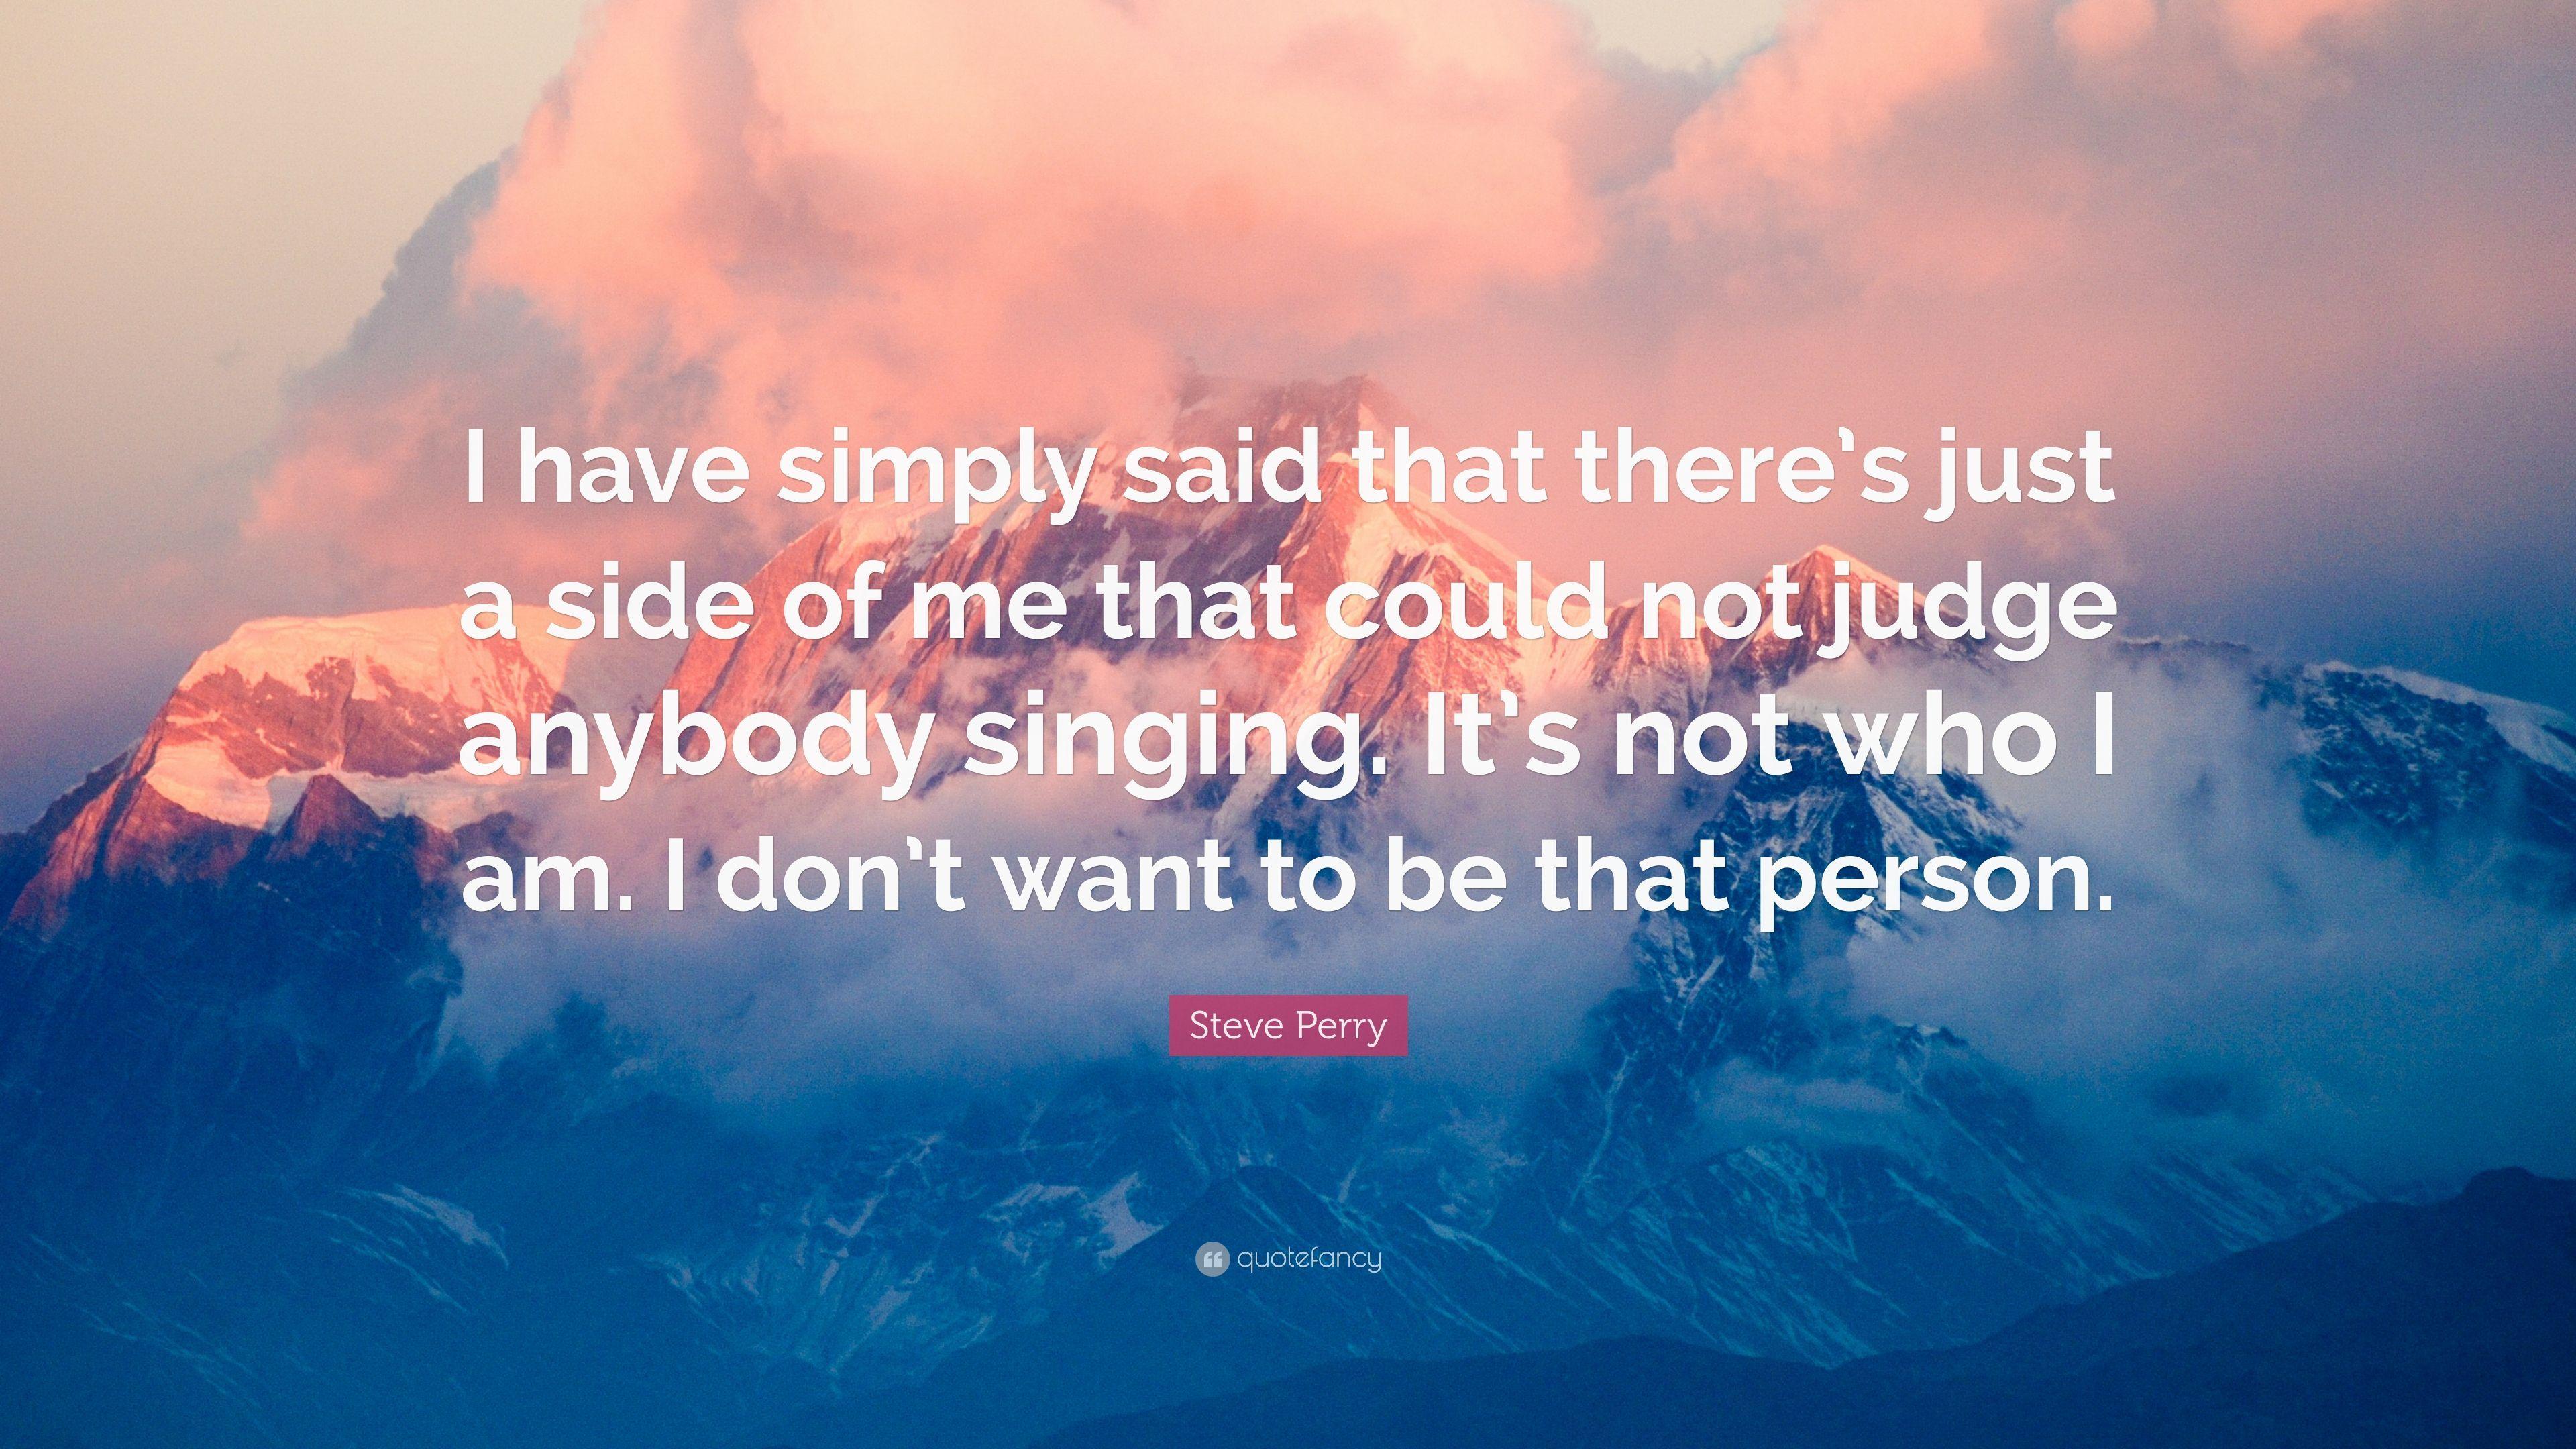 Steve Perry Quote: “I have simply said that there's just a side